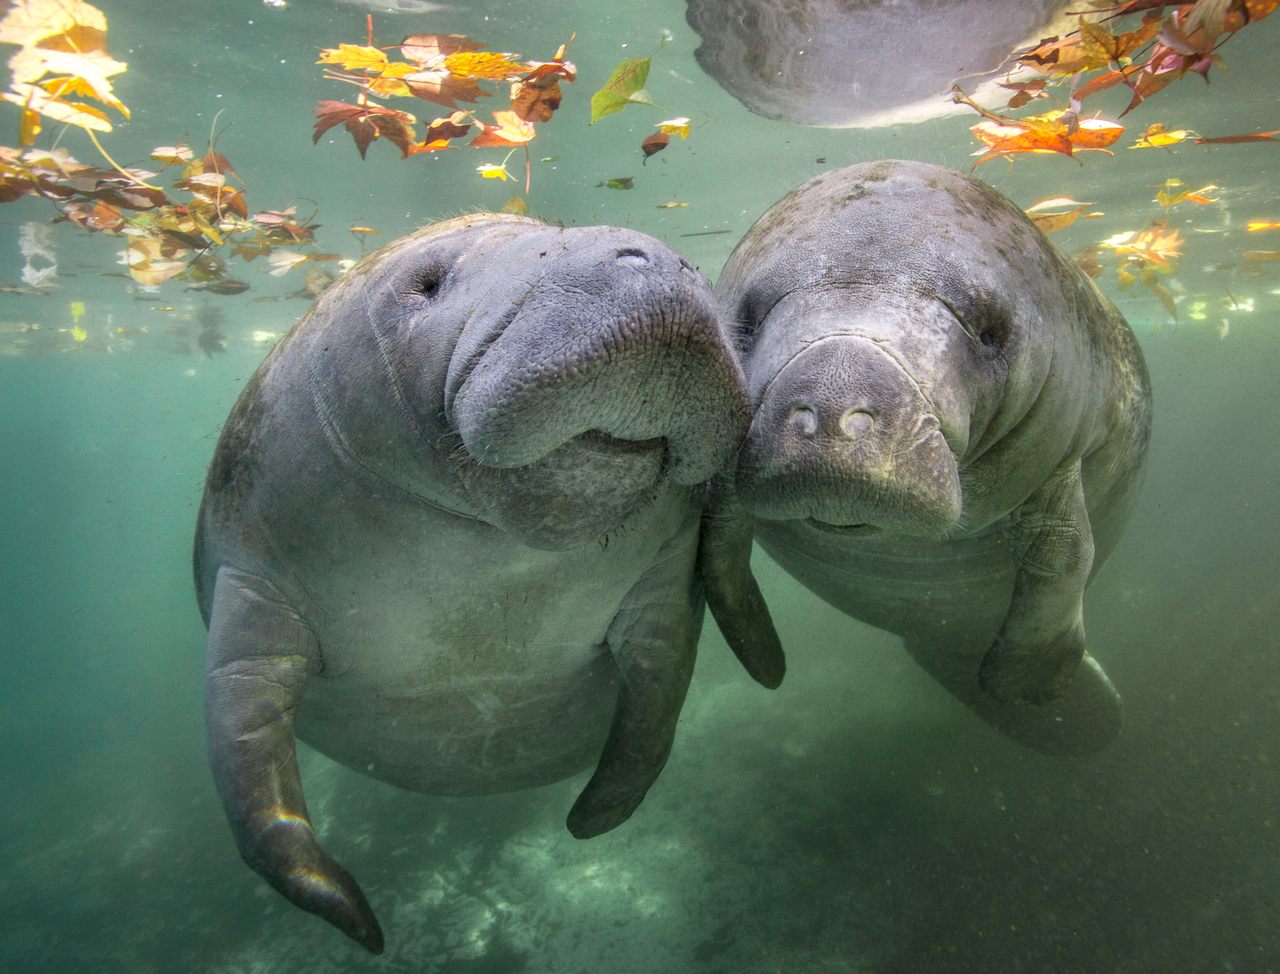 A pair of manatees in Florida's Crystal River.